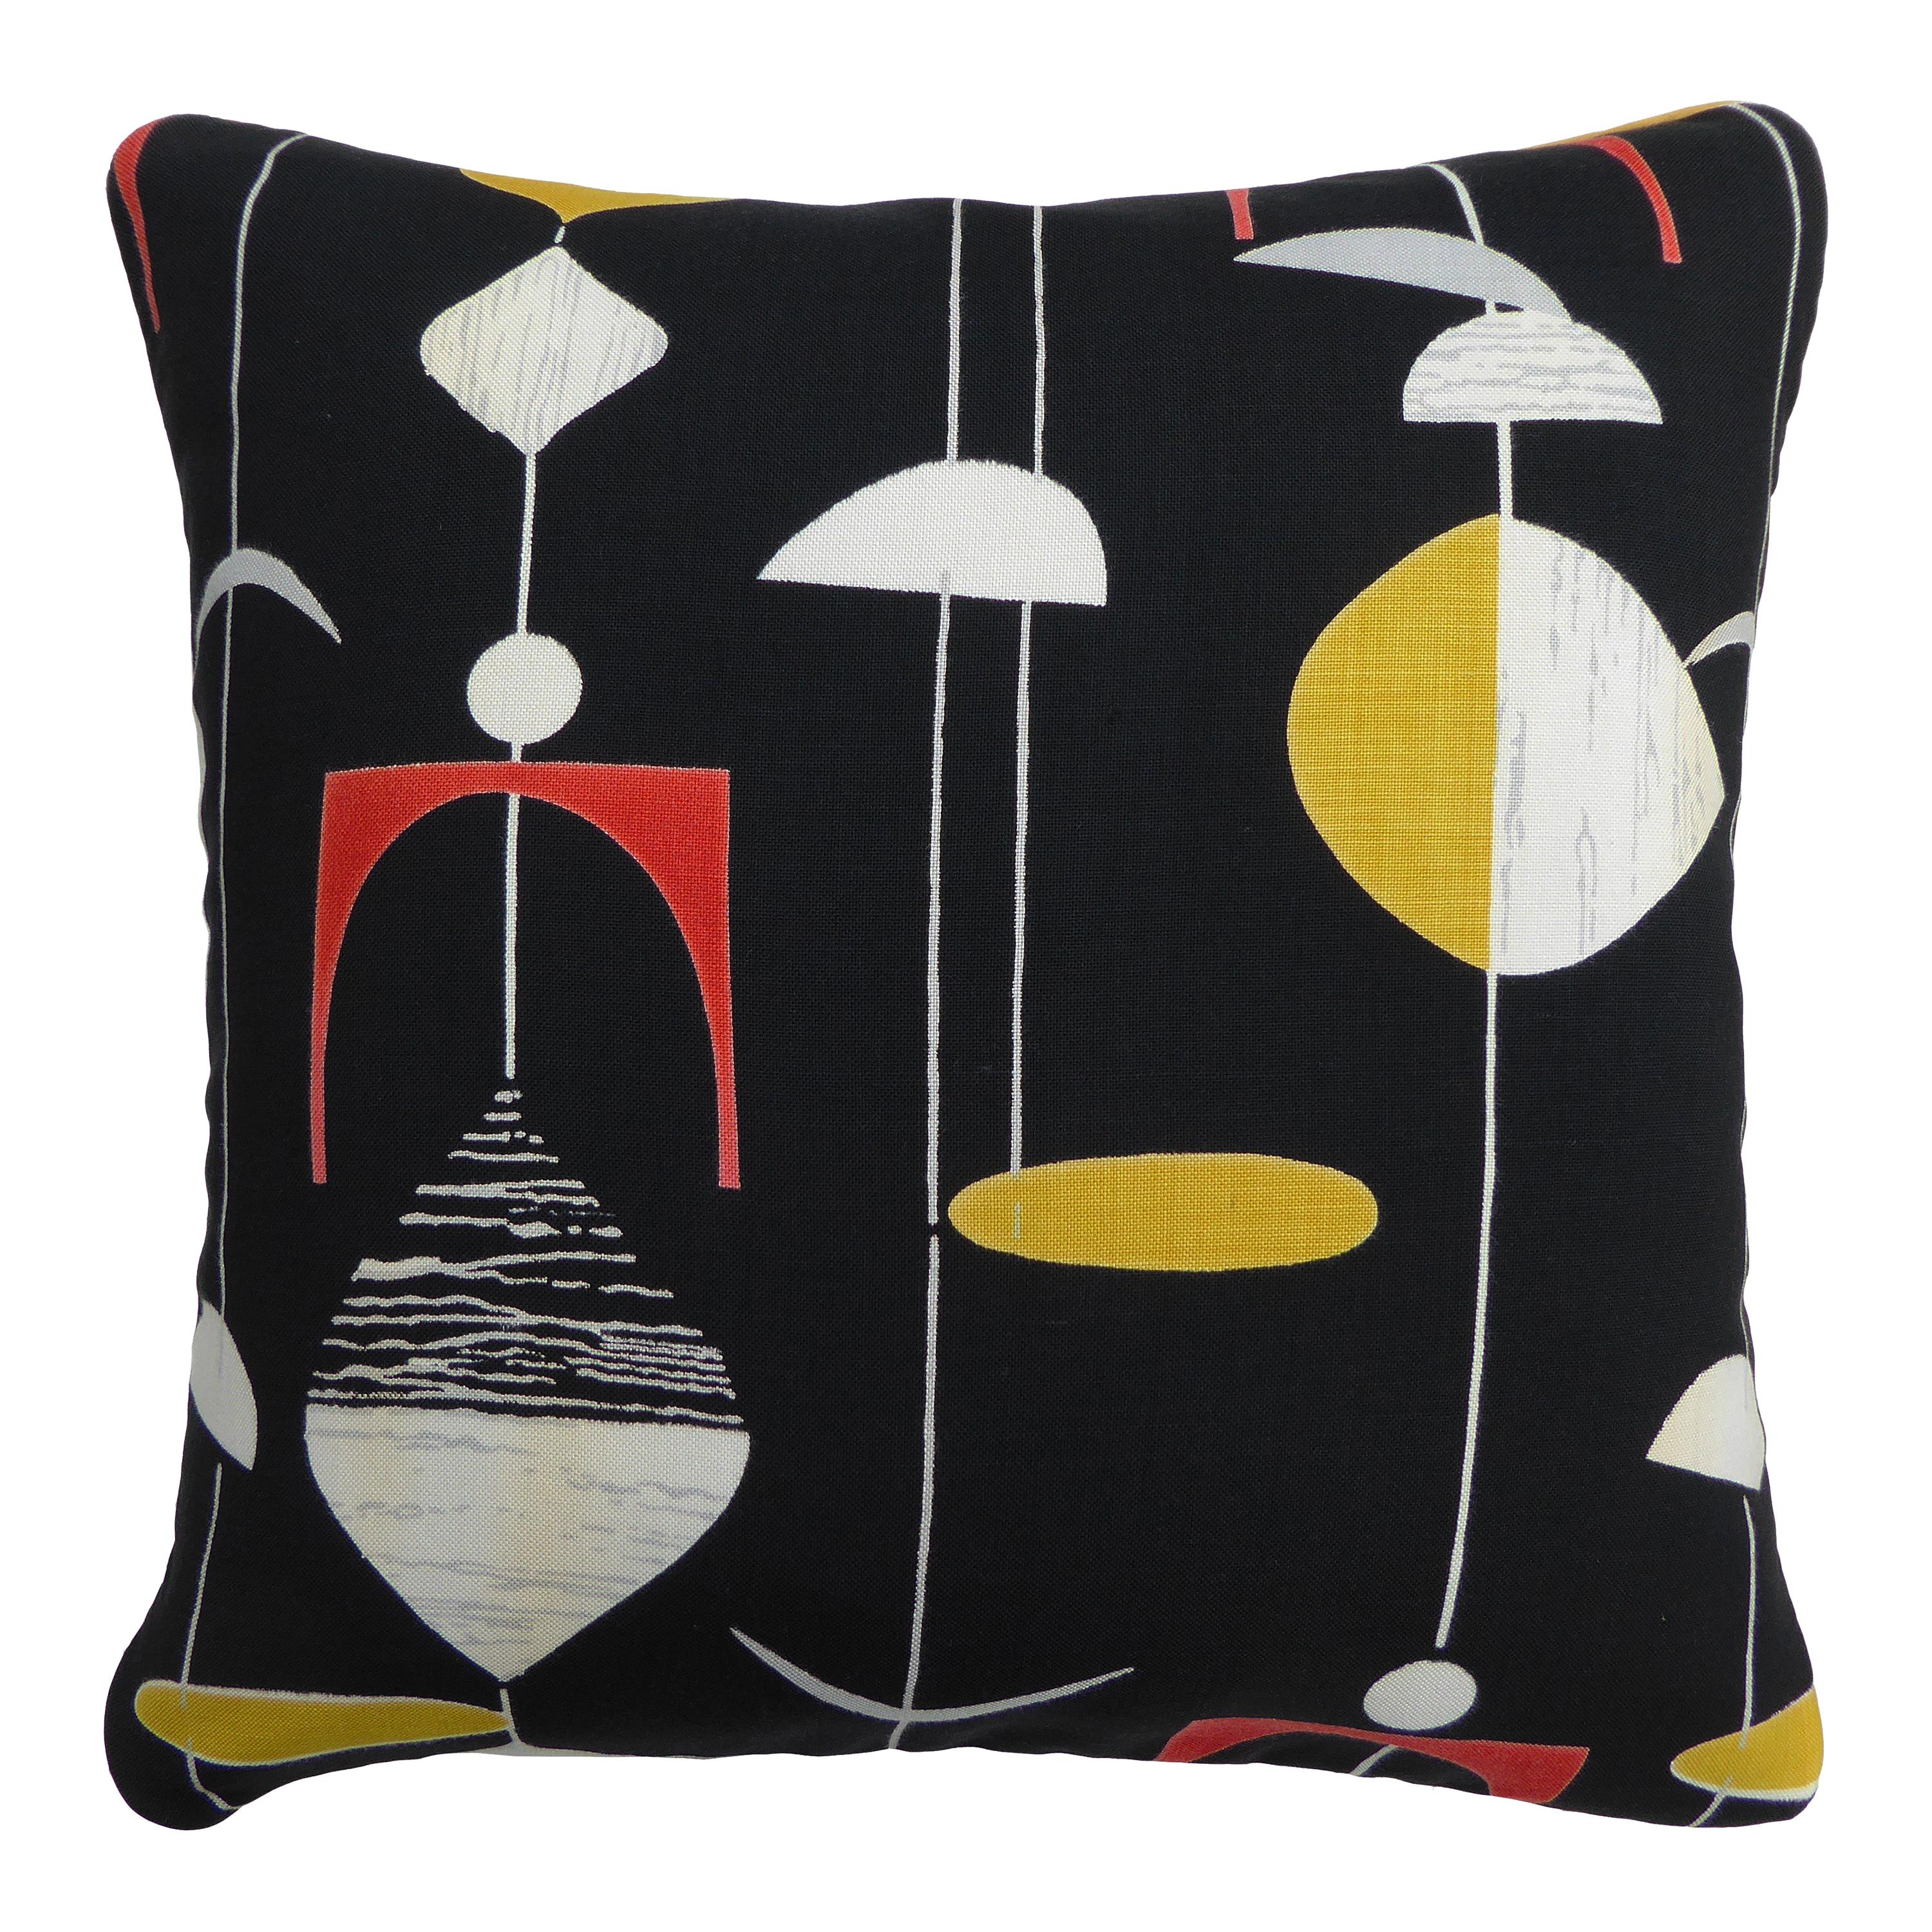 Vintage Cushions, Luxury Bespoke Made Pillow, Mobiles, Made in UK